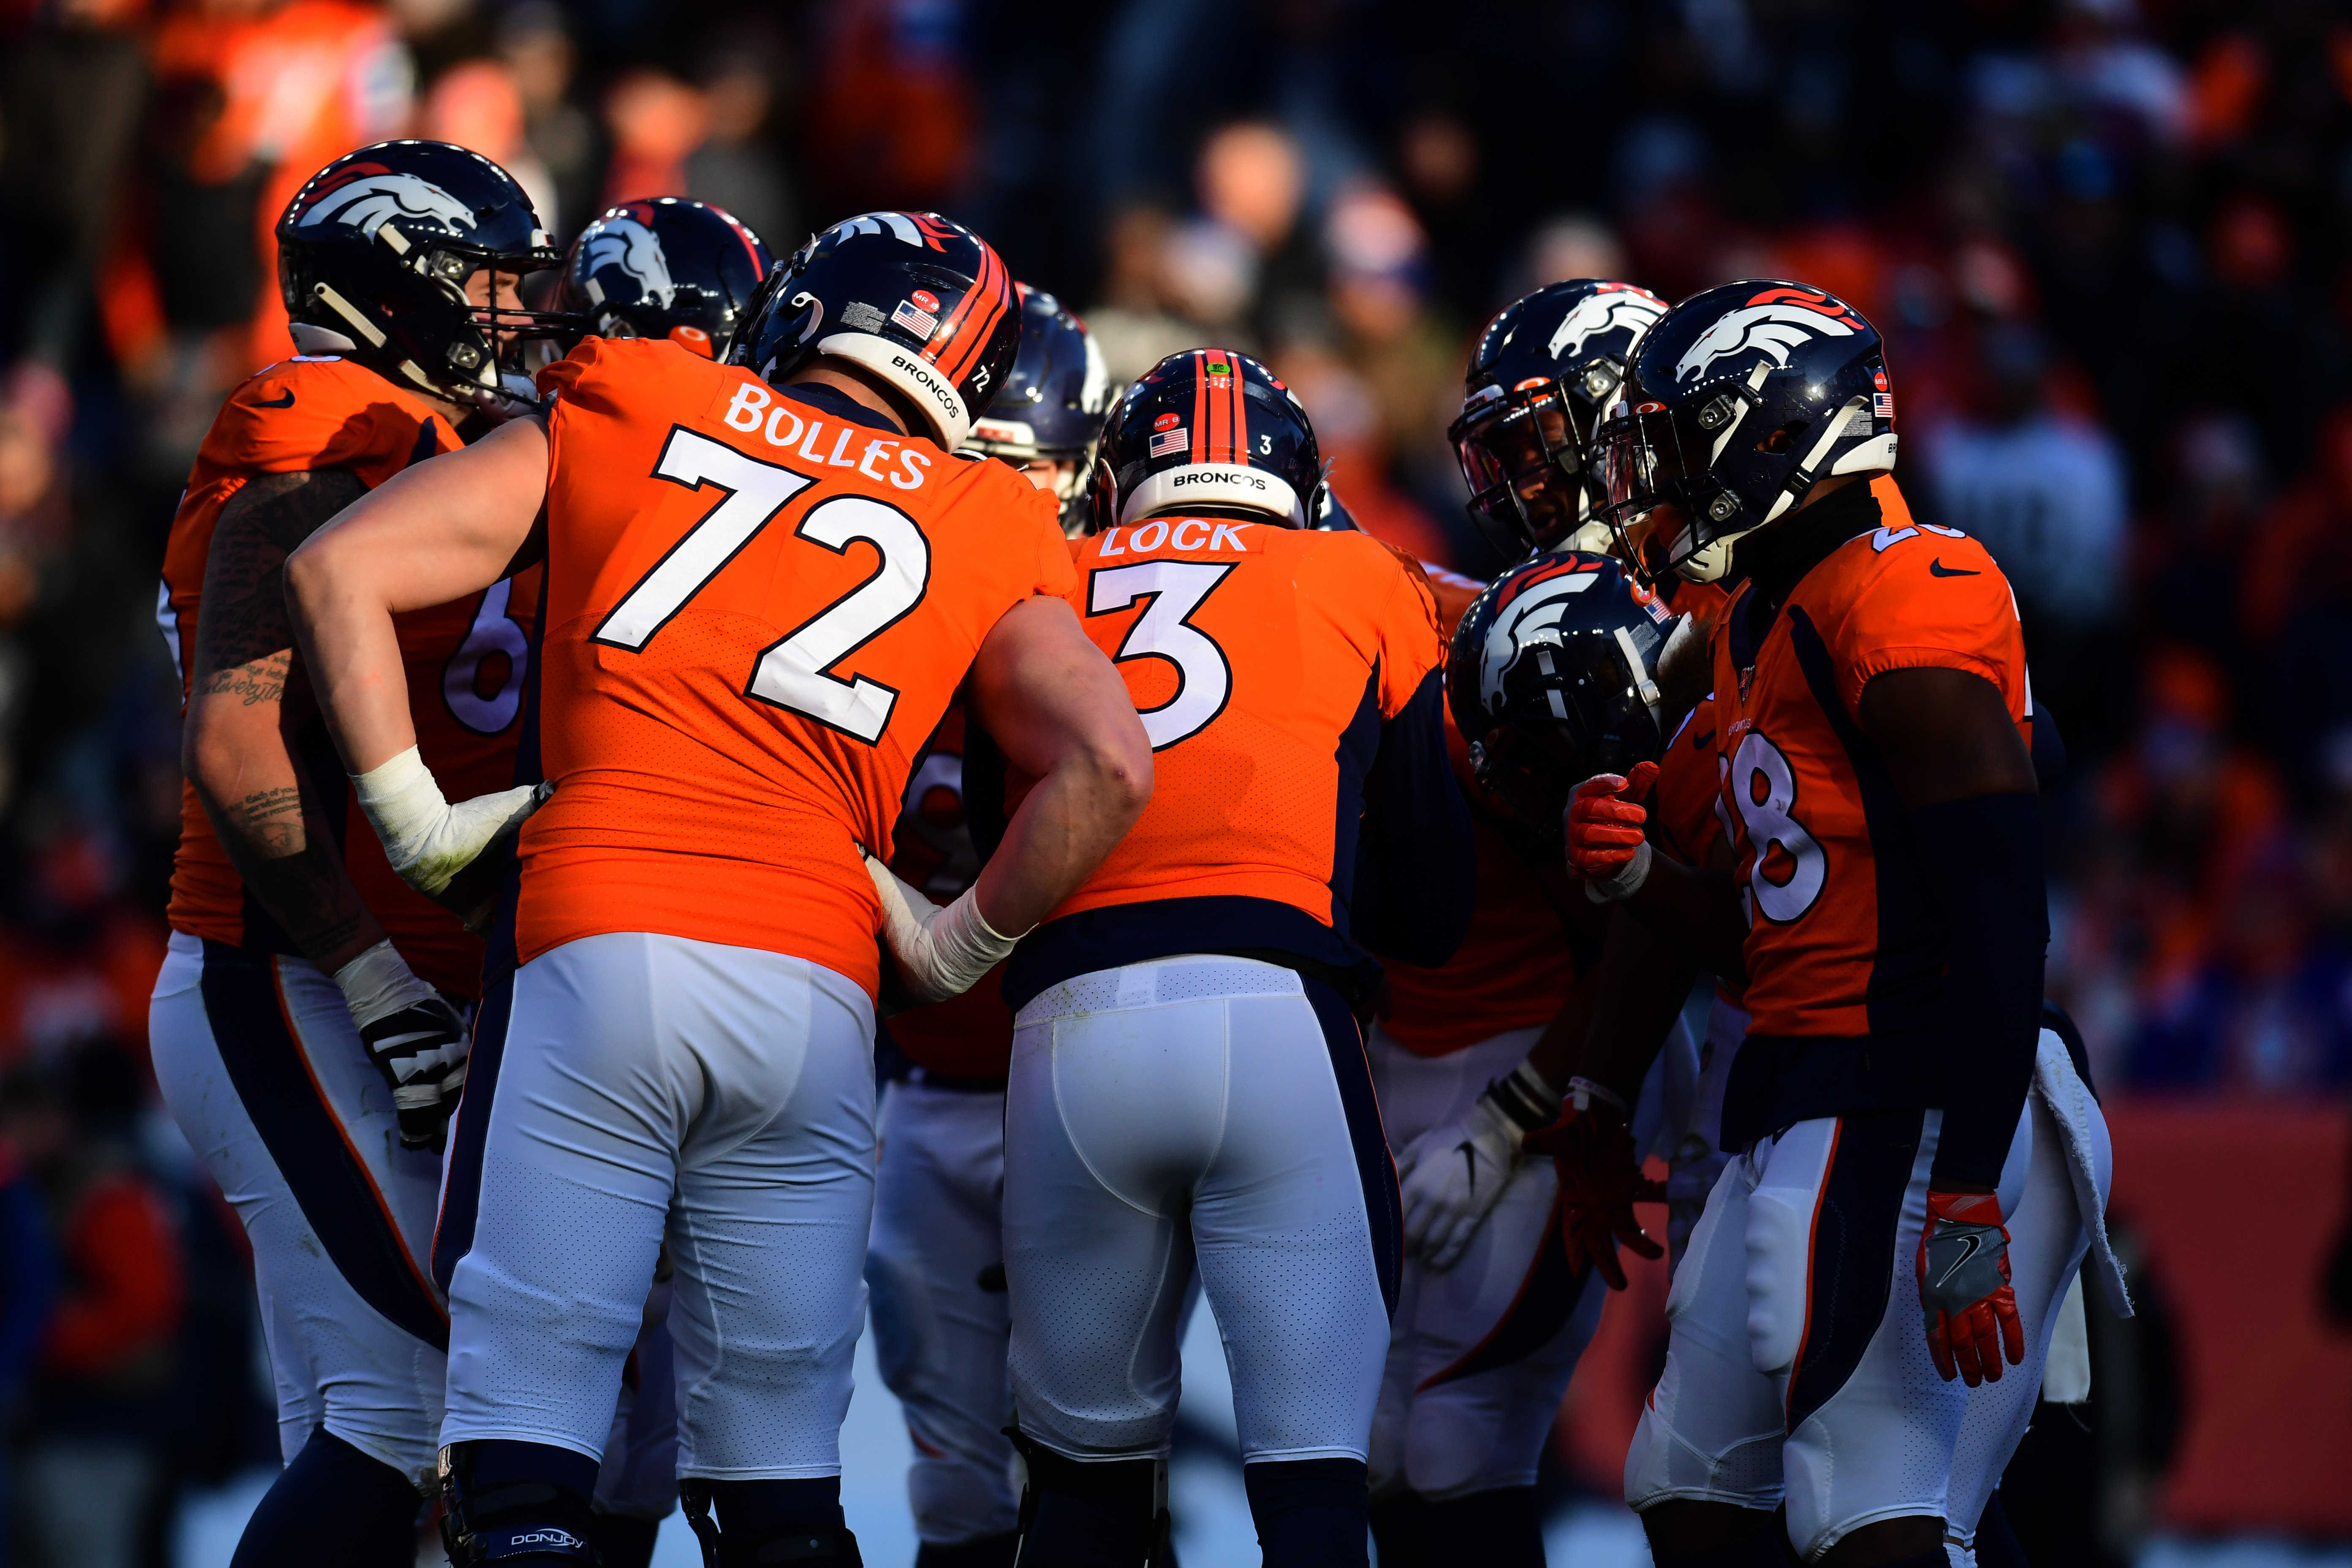 Denver Broncos quarterback Drew Lock (3) huddles with teammates in the second quarter against the Oakland Raiders at Empower Field at Mile High.